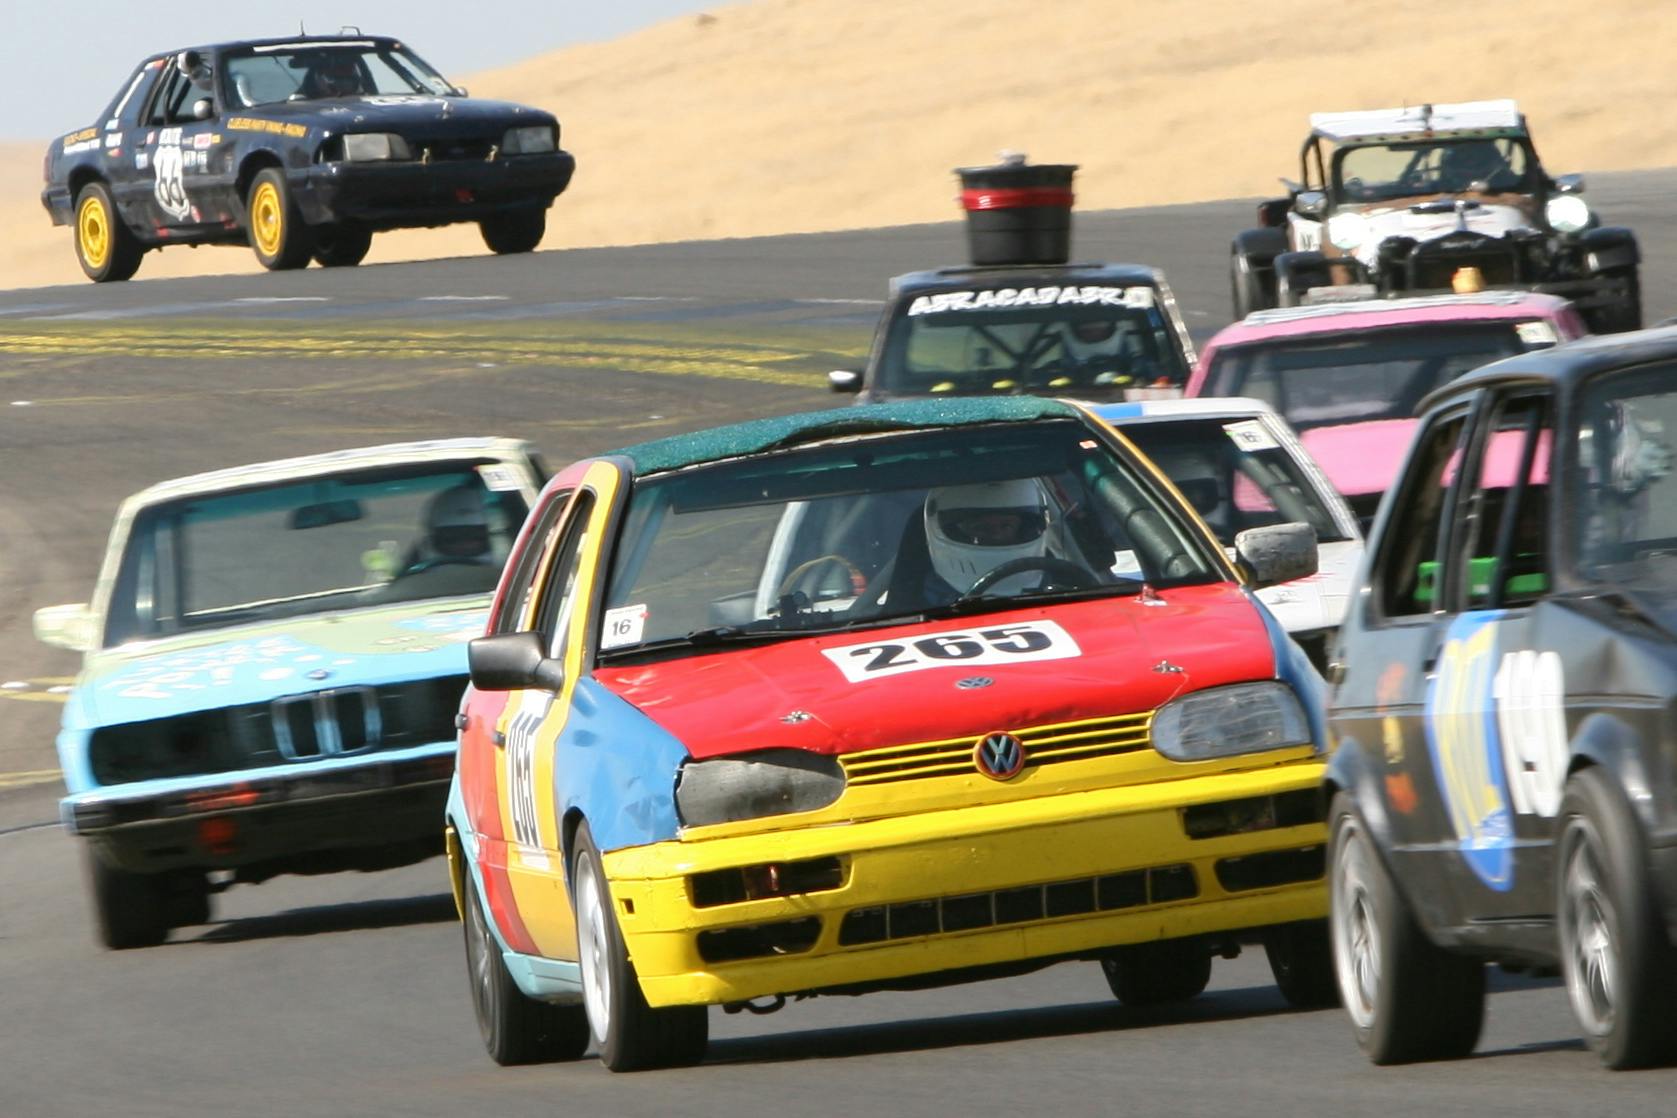 Cars round the track in the 24 Hours of Lemons